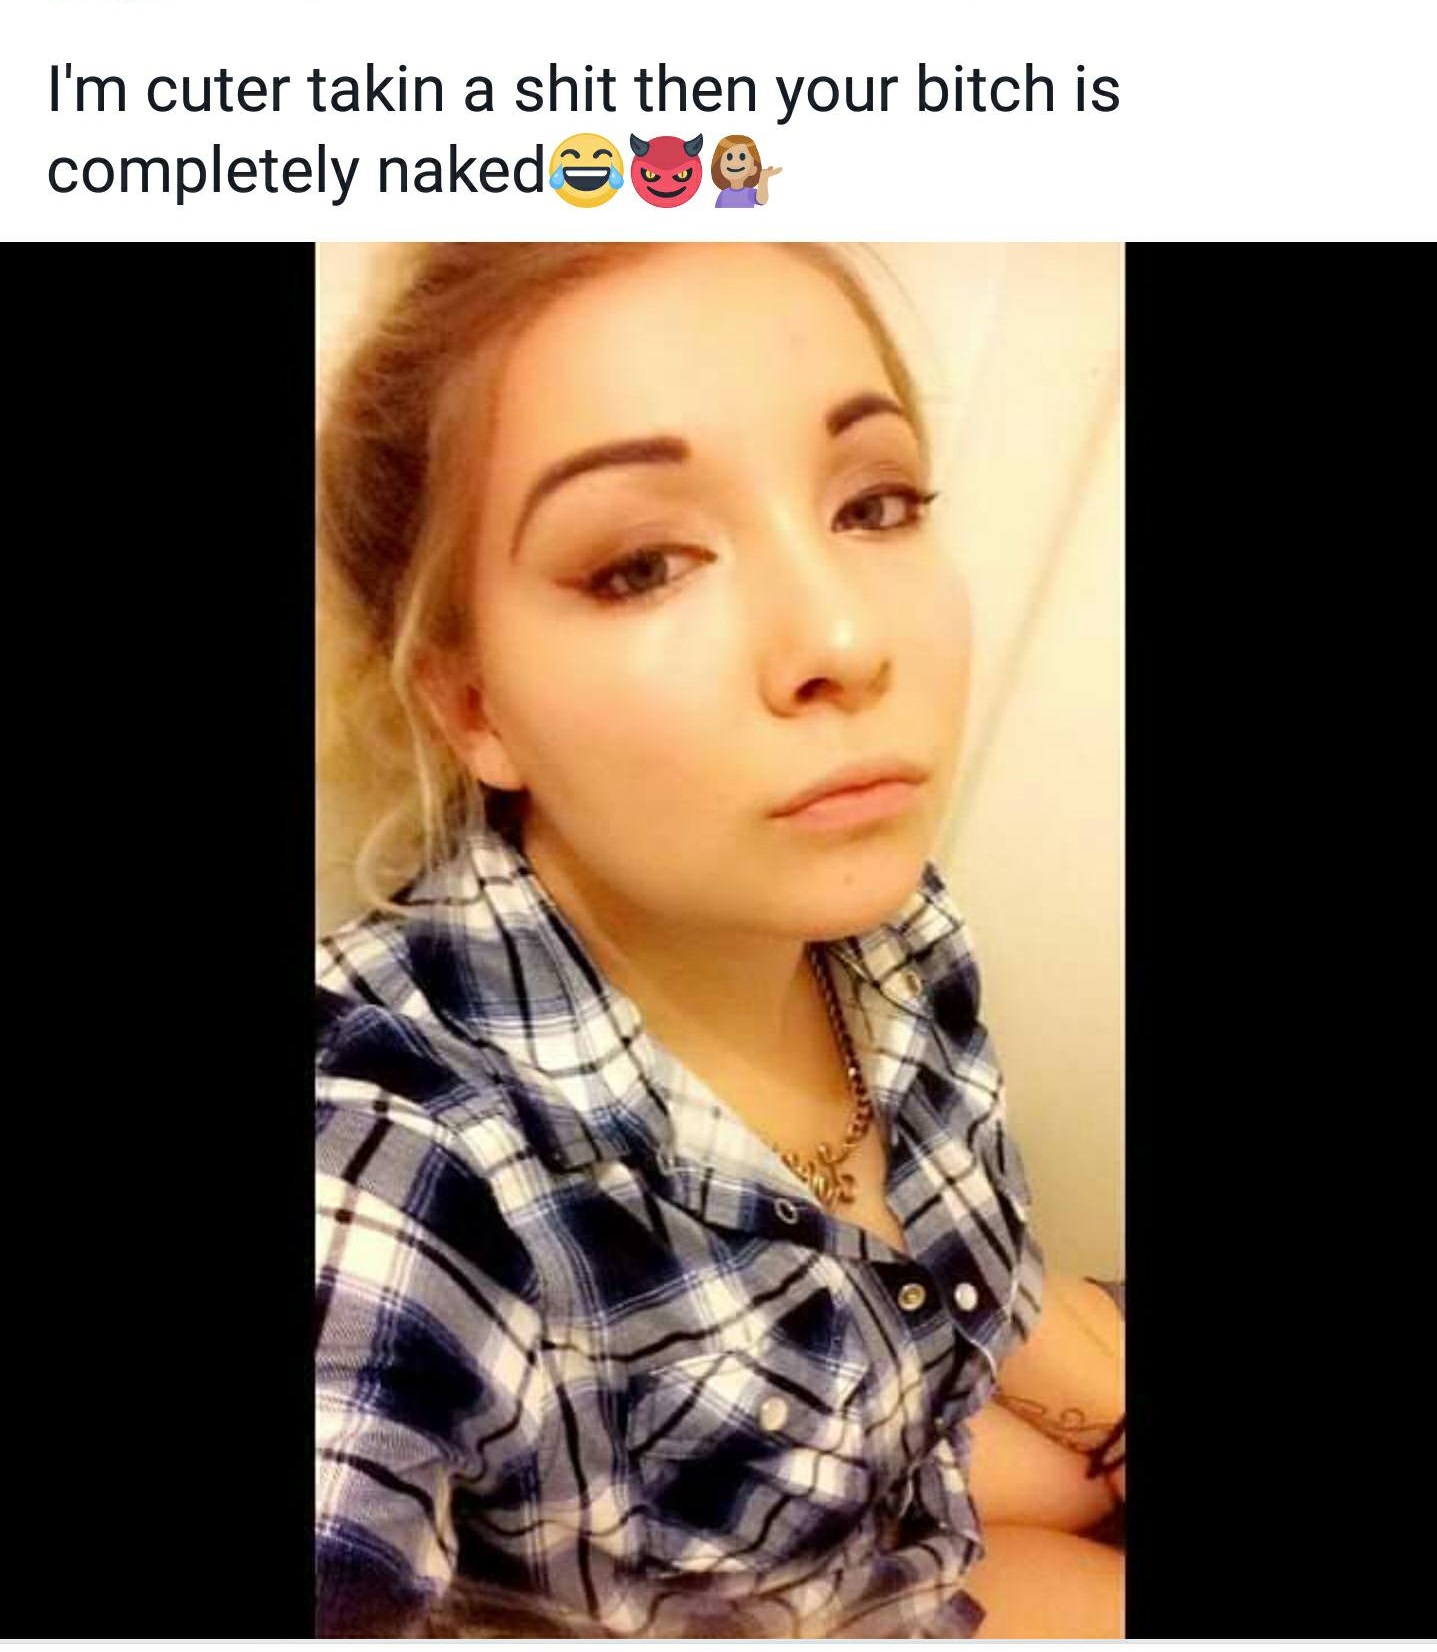 selfie - I'm cuter takin a shit then your bitch is completely naked0